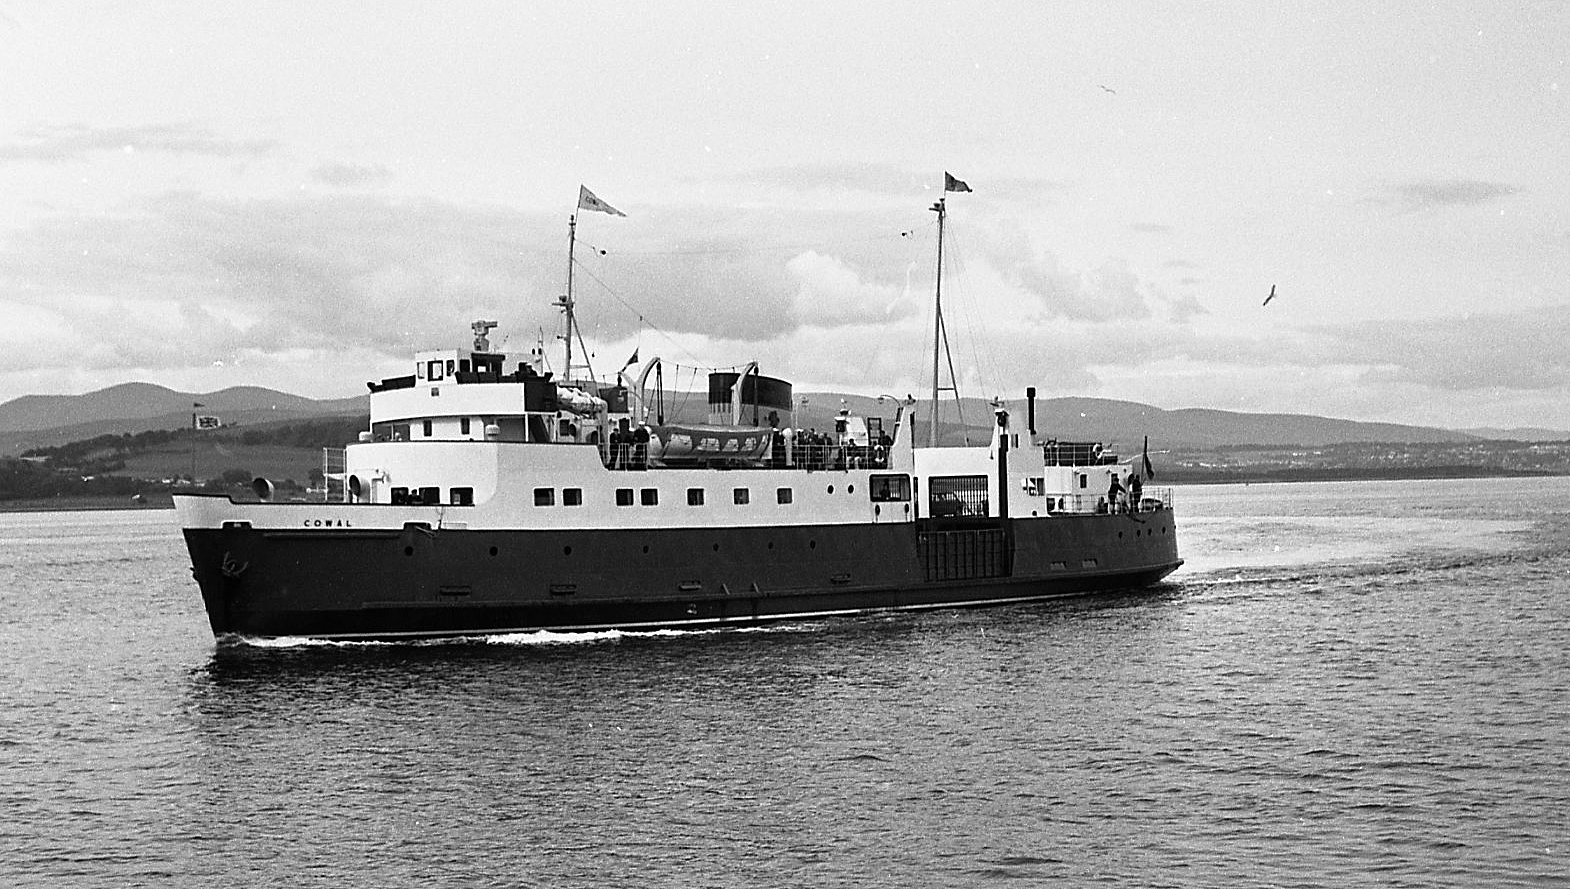 black and white pograph of a boat traveling in water